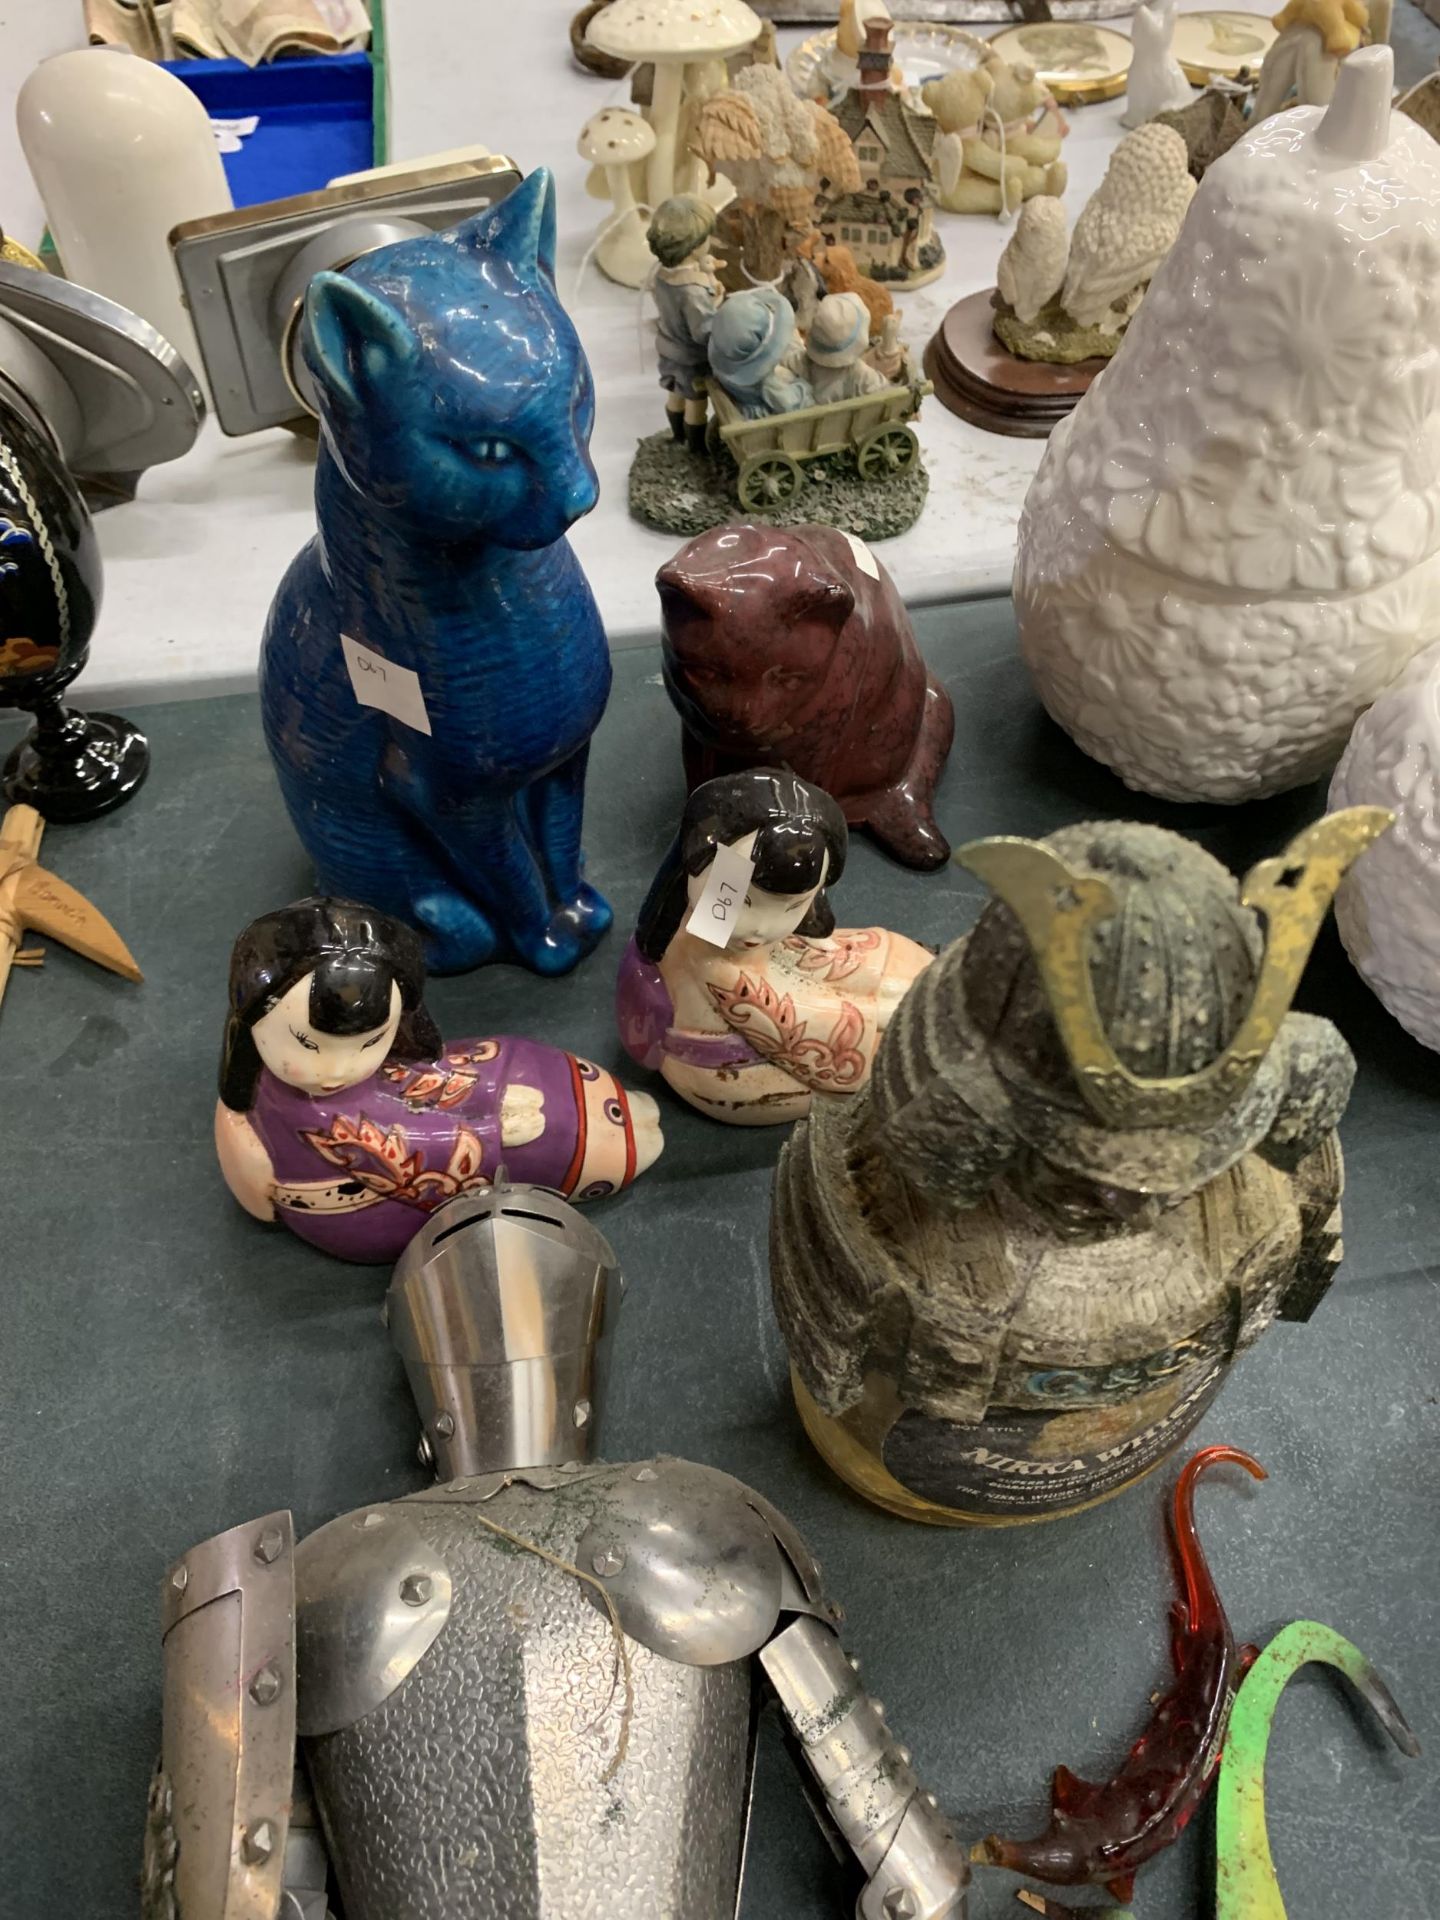 A QUANTITY OF ITEMS TO INCLUDE CERAMIC CATS, A KNIGHT, JAPANESE STYLE FIGURES, ETC - Image 3 of 4